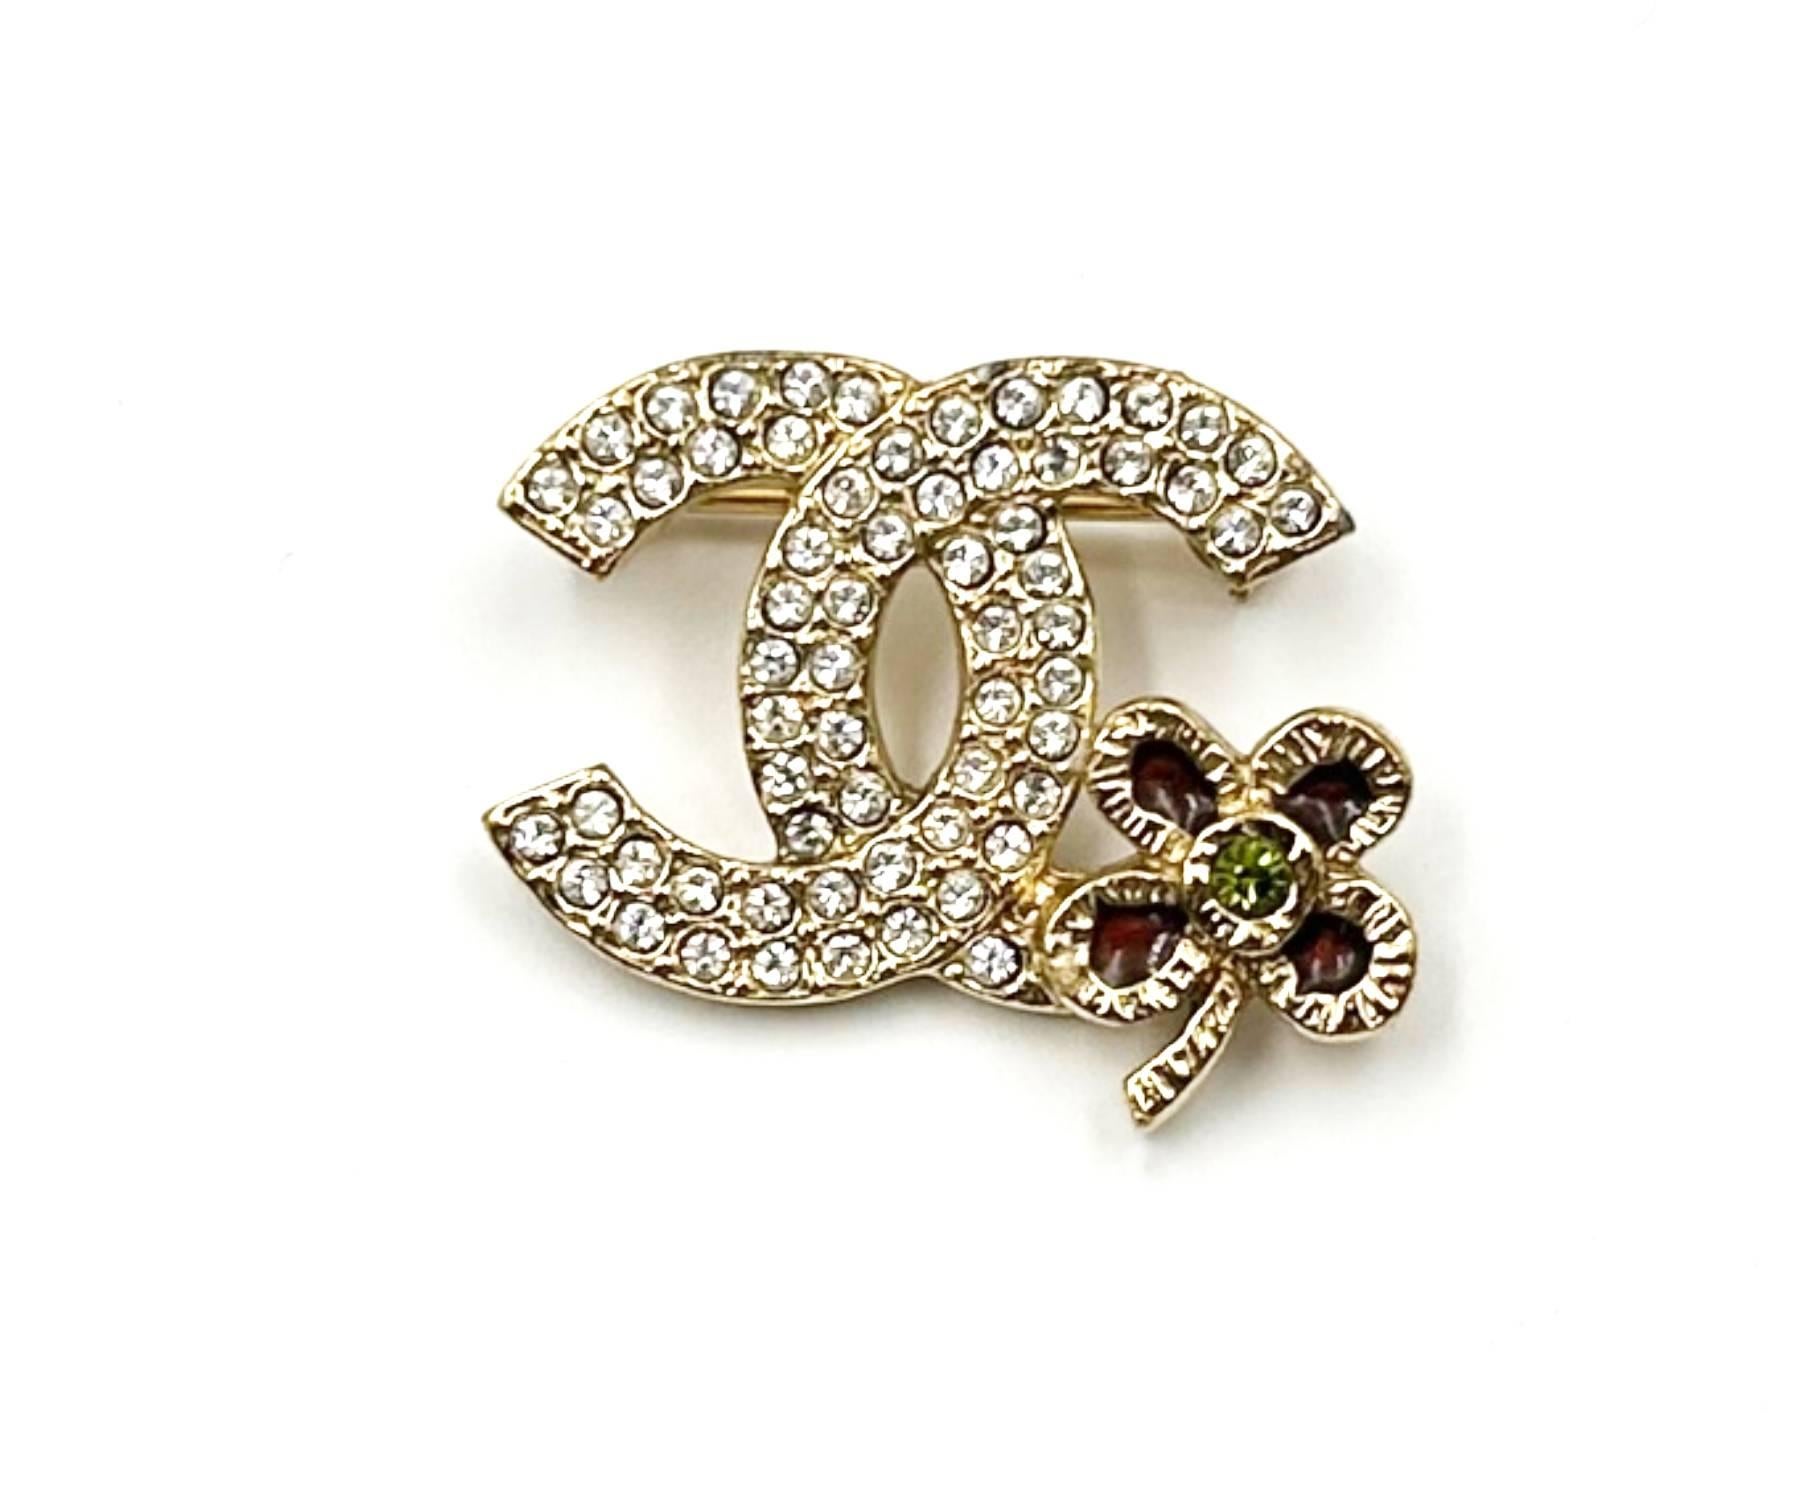 Chanel Small Gold CC Crystal Red Corner Flower Small Brooch

*Marked 05
*Made in France

-Approximately 1.5